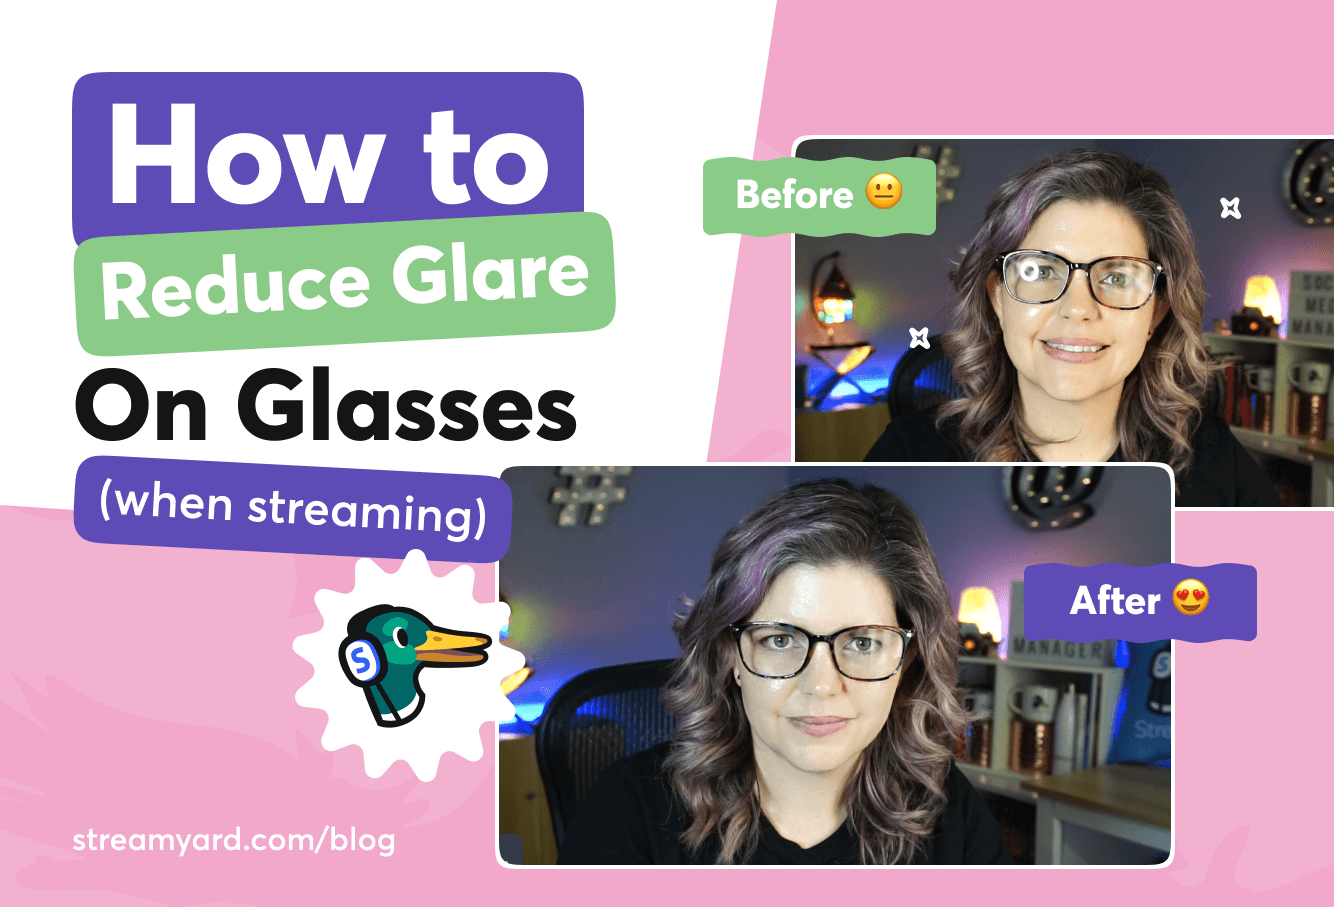 Find out how to prevent glare on glasses while live streaming, so that you look good with glasses on StreamYard.